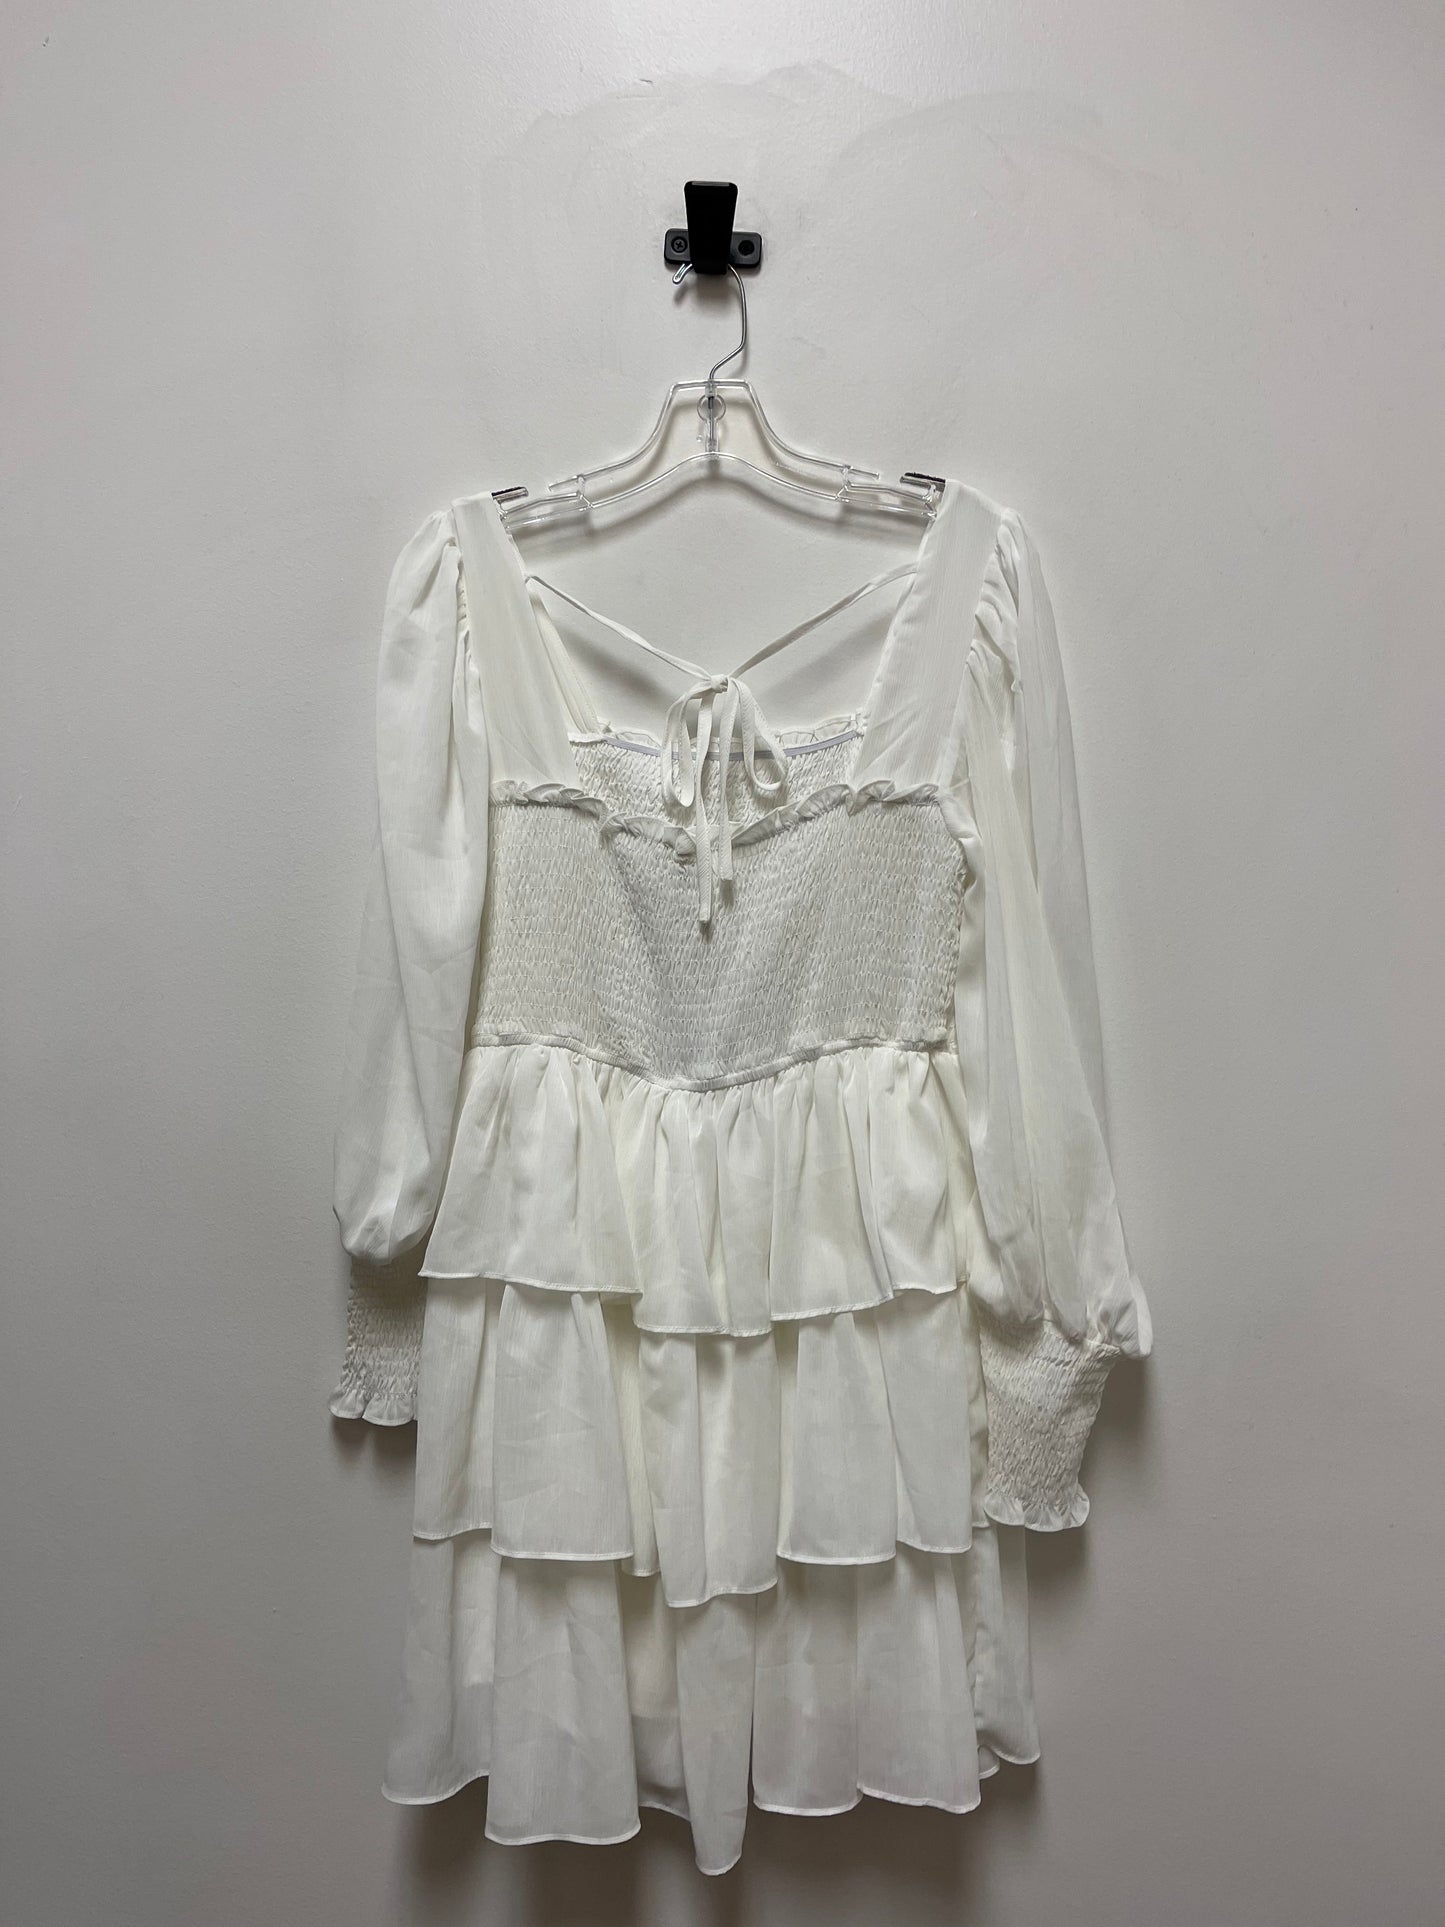 White Dress Casual Short Clothes Mentor, Size 2x